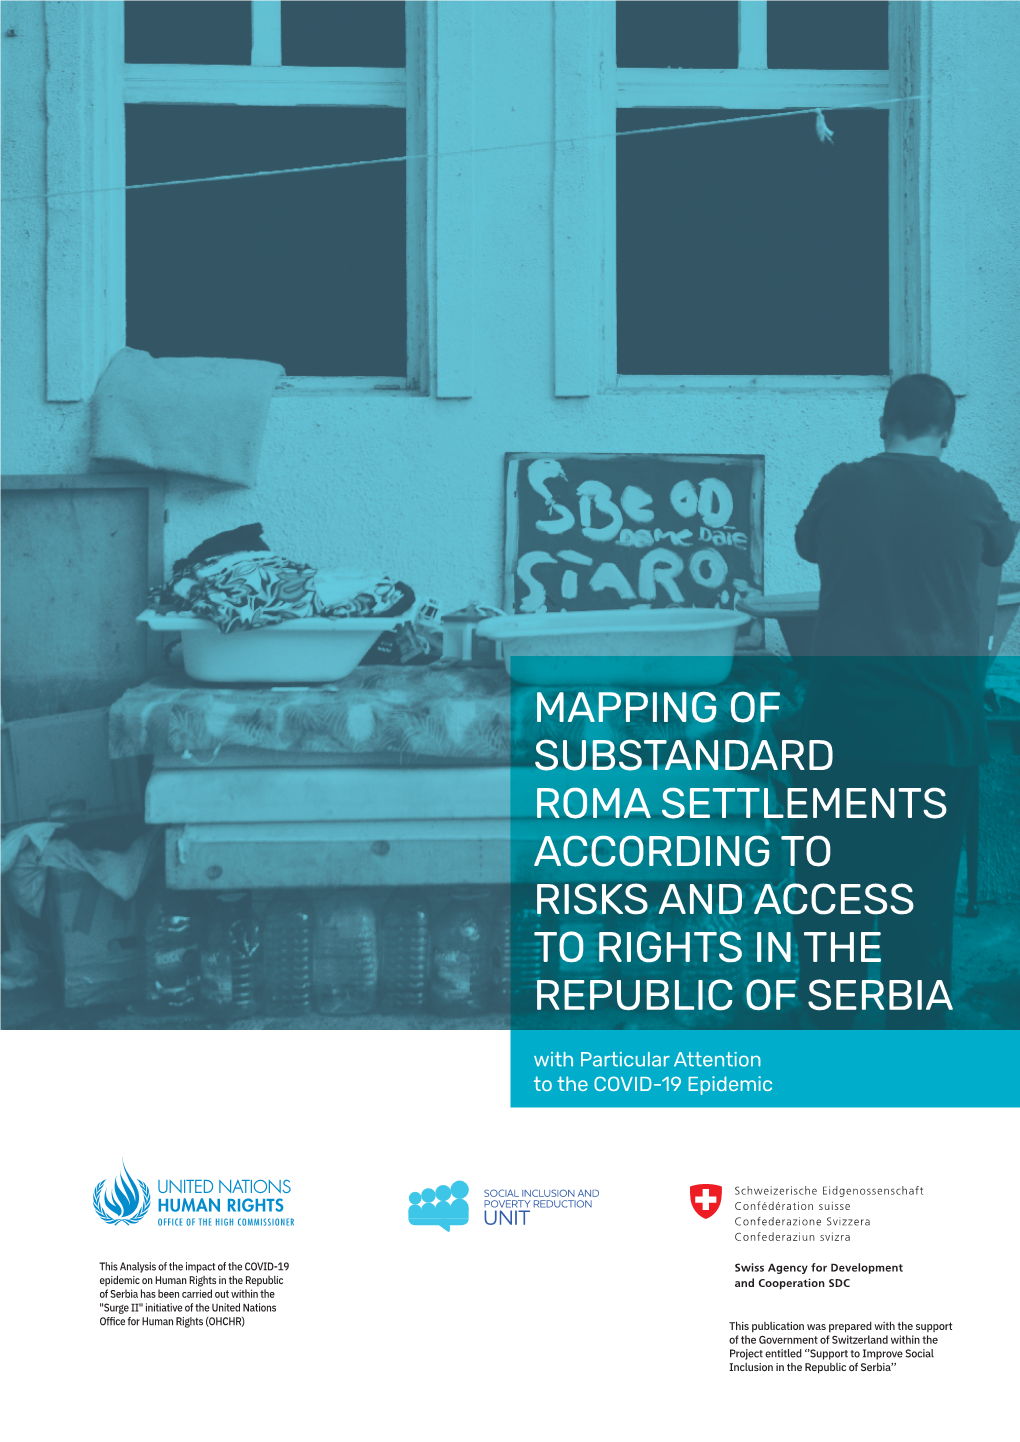 Mapping of Substandard Roma Settlements According to Risks and Access to Rights in the Republic of Serbia